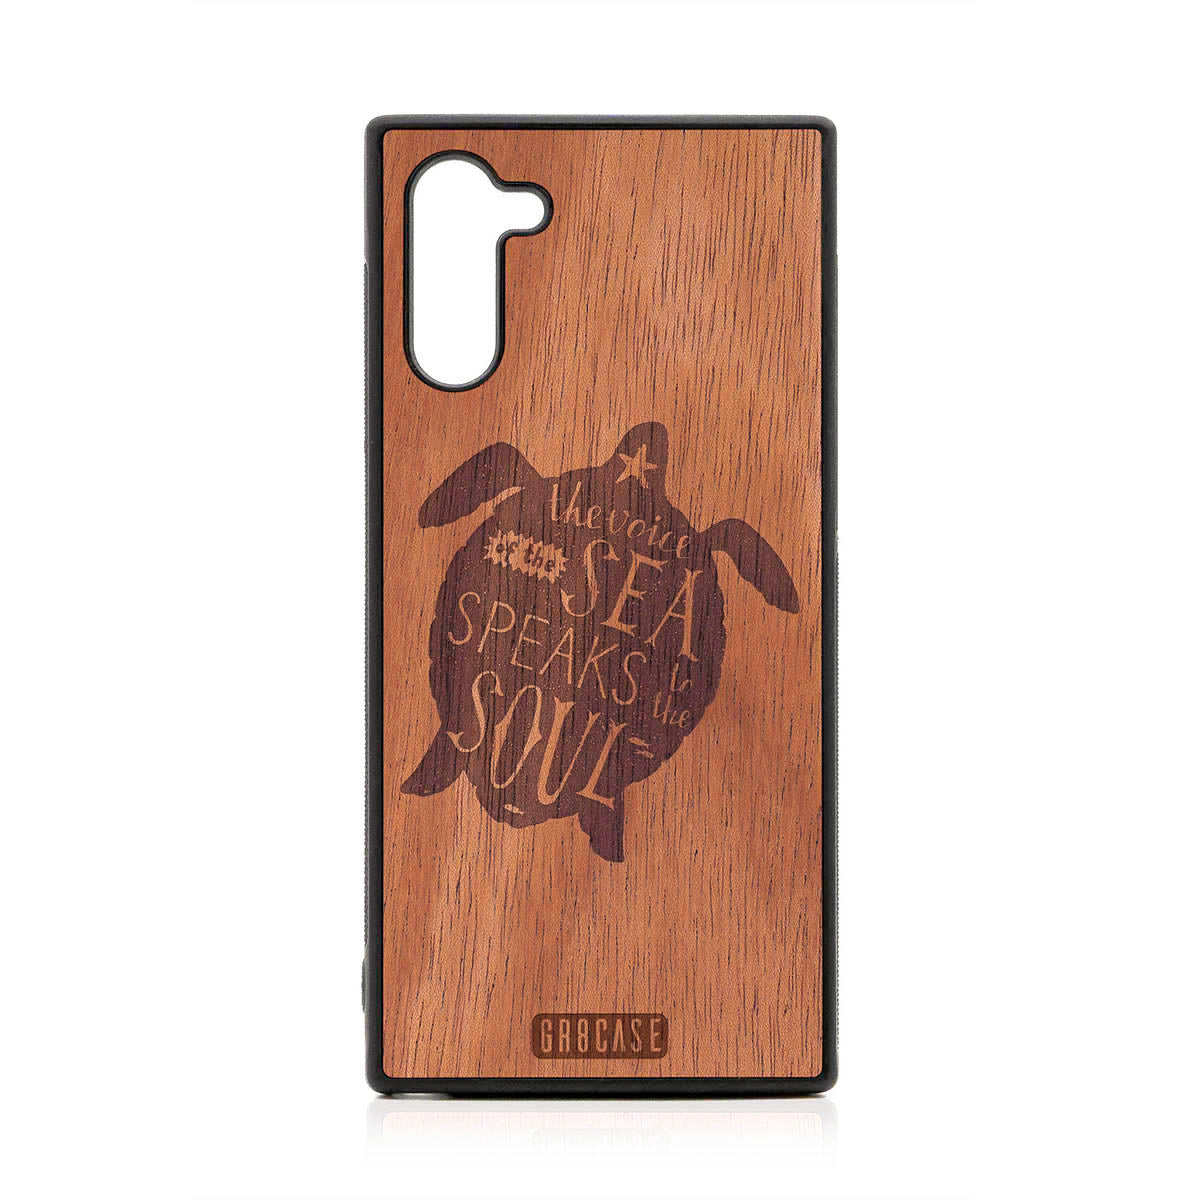 The Voice Of The Sea Speaks To The Soul (Turtle) Design Wood Case For Samsung Galaxy Note 10